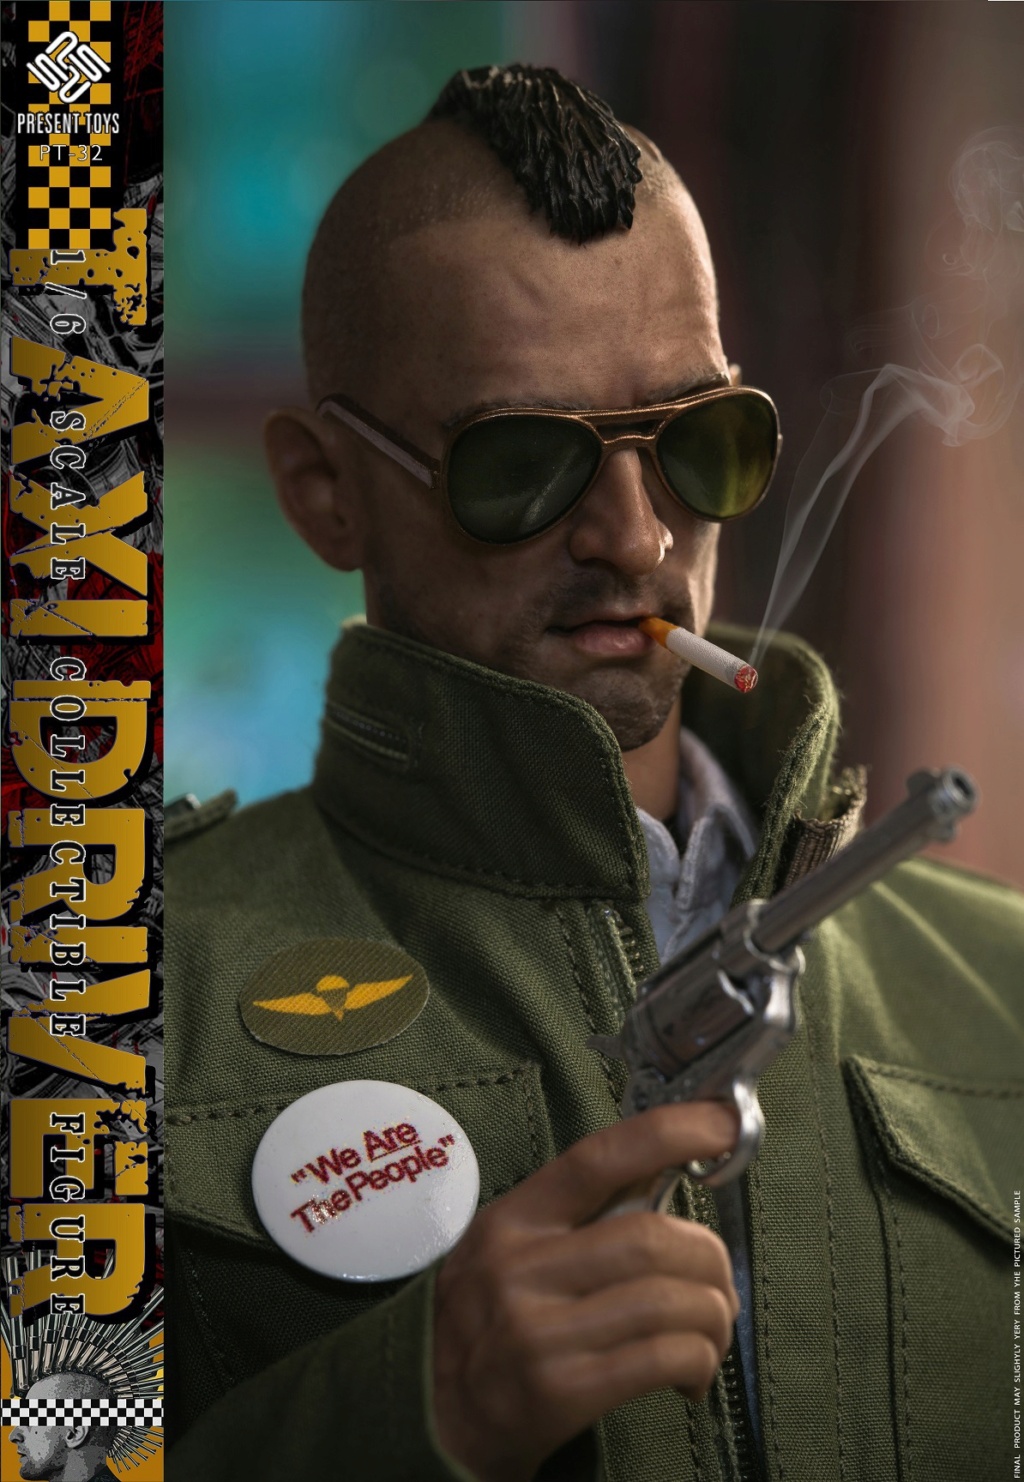 movie-based - NEW PRODUCT: Present Toys: 1/6 "Taxi Driver" Collection Doll#PT-sp32 18193210